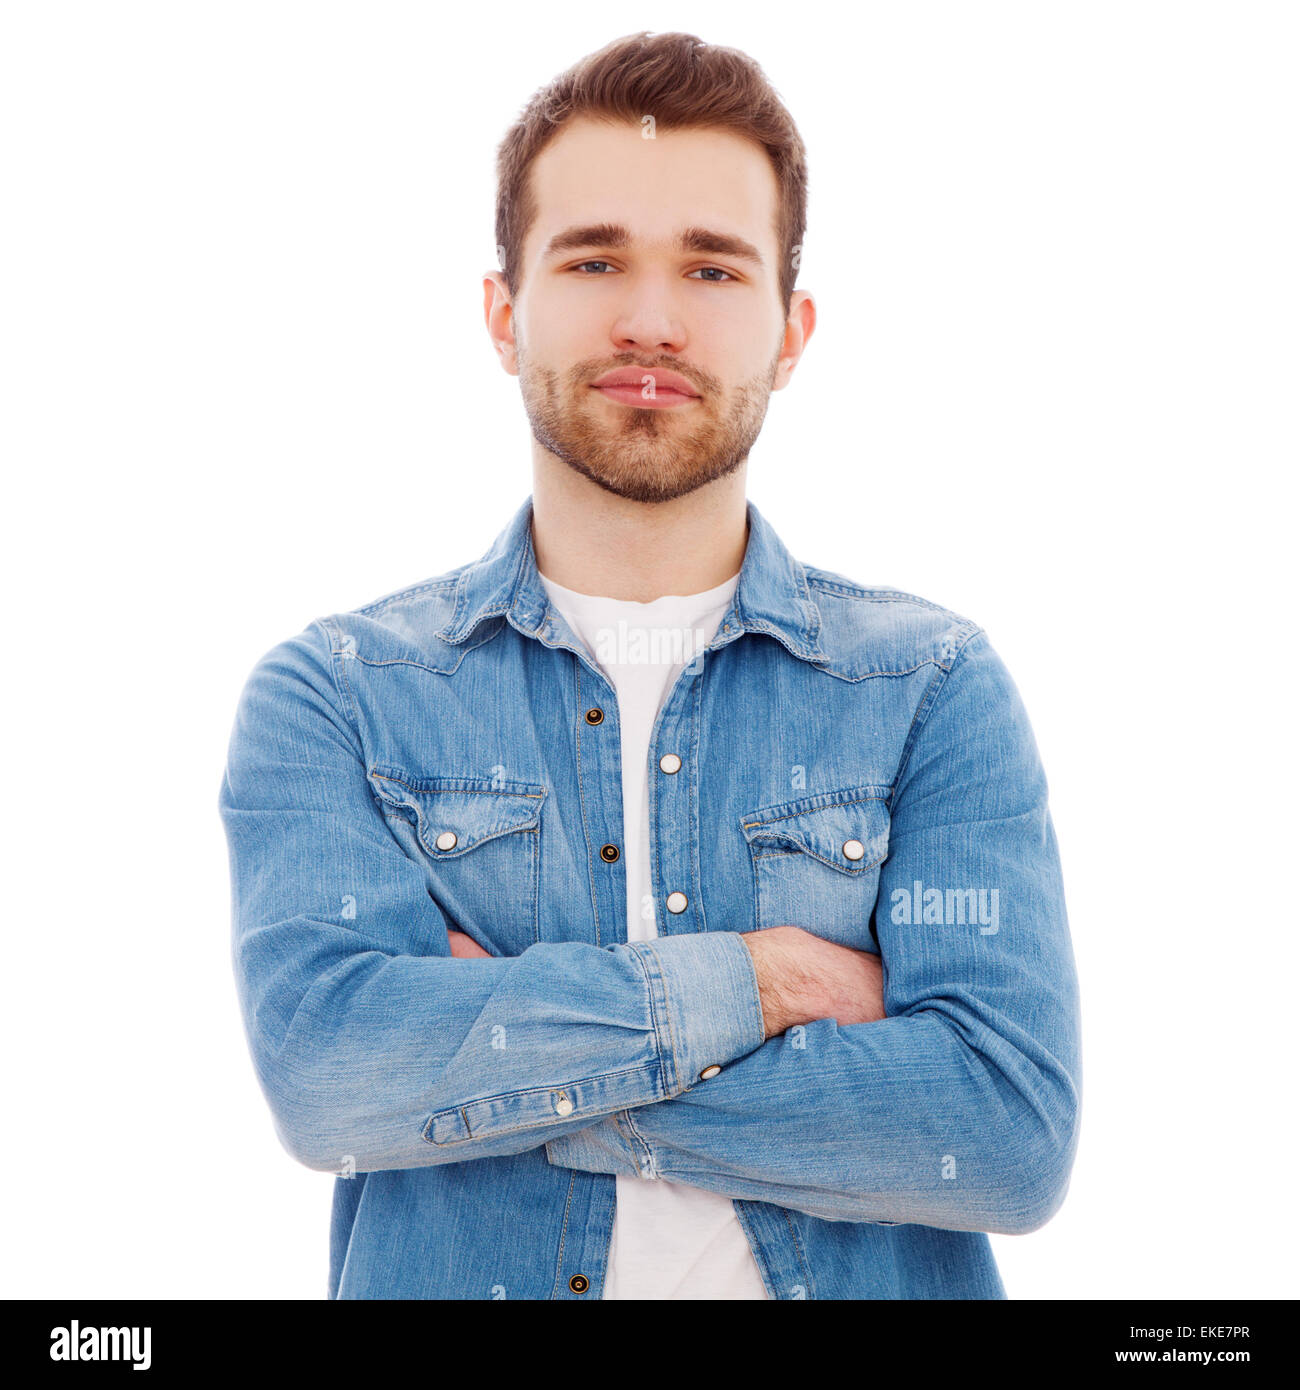 Portrait of a young man Stock Photo